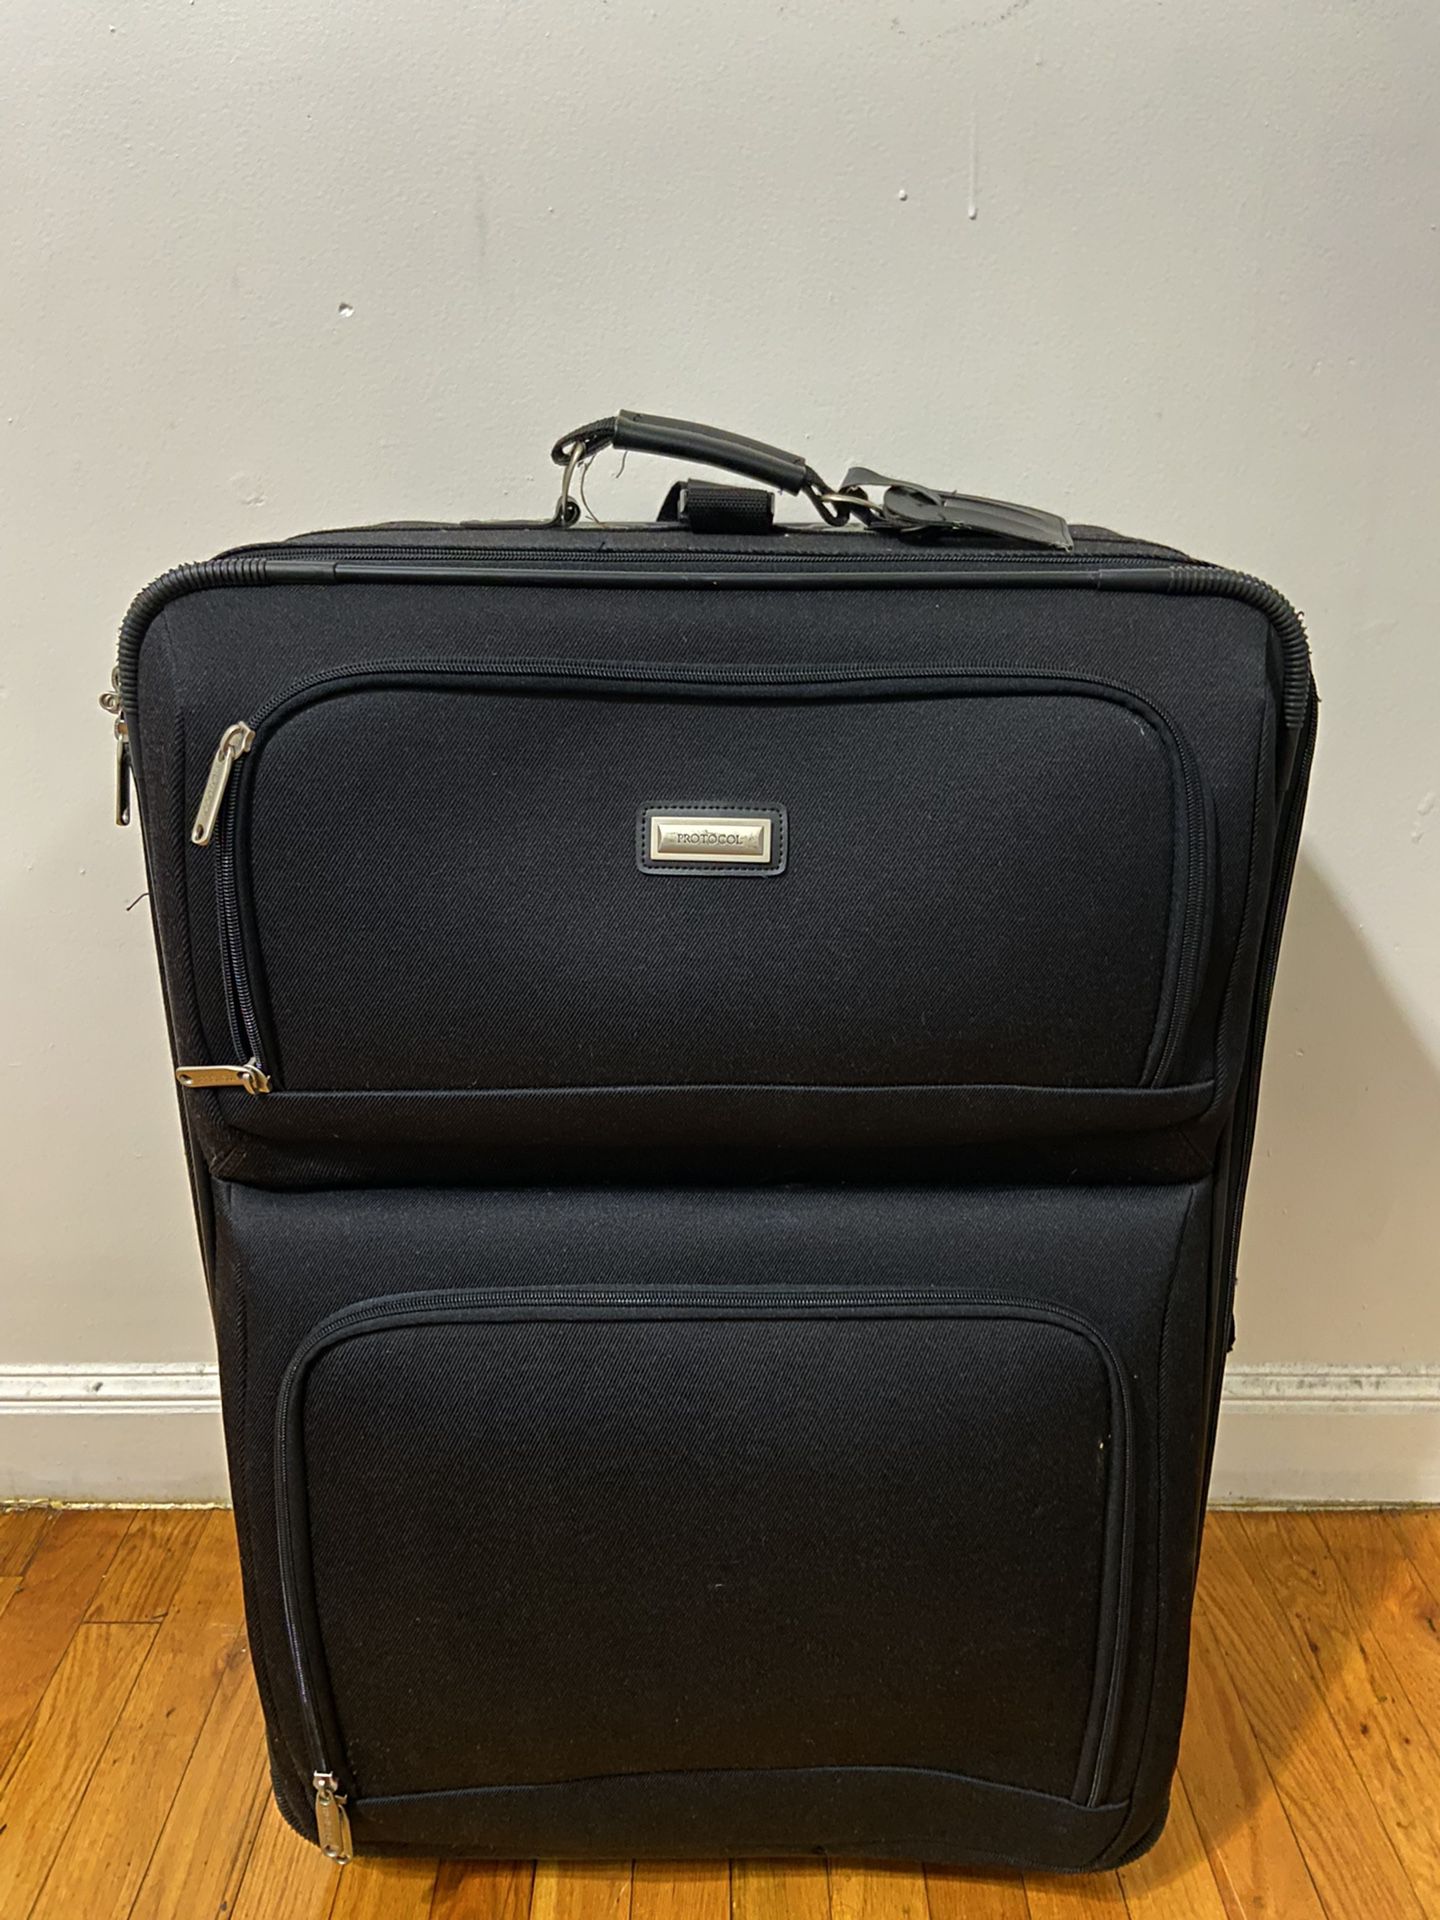 Protocol Large Checked Suitcase